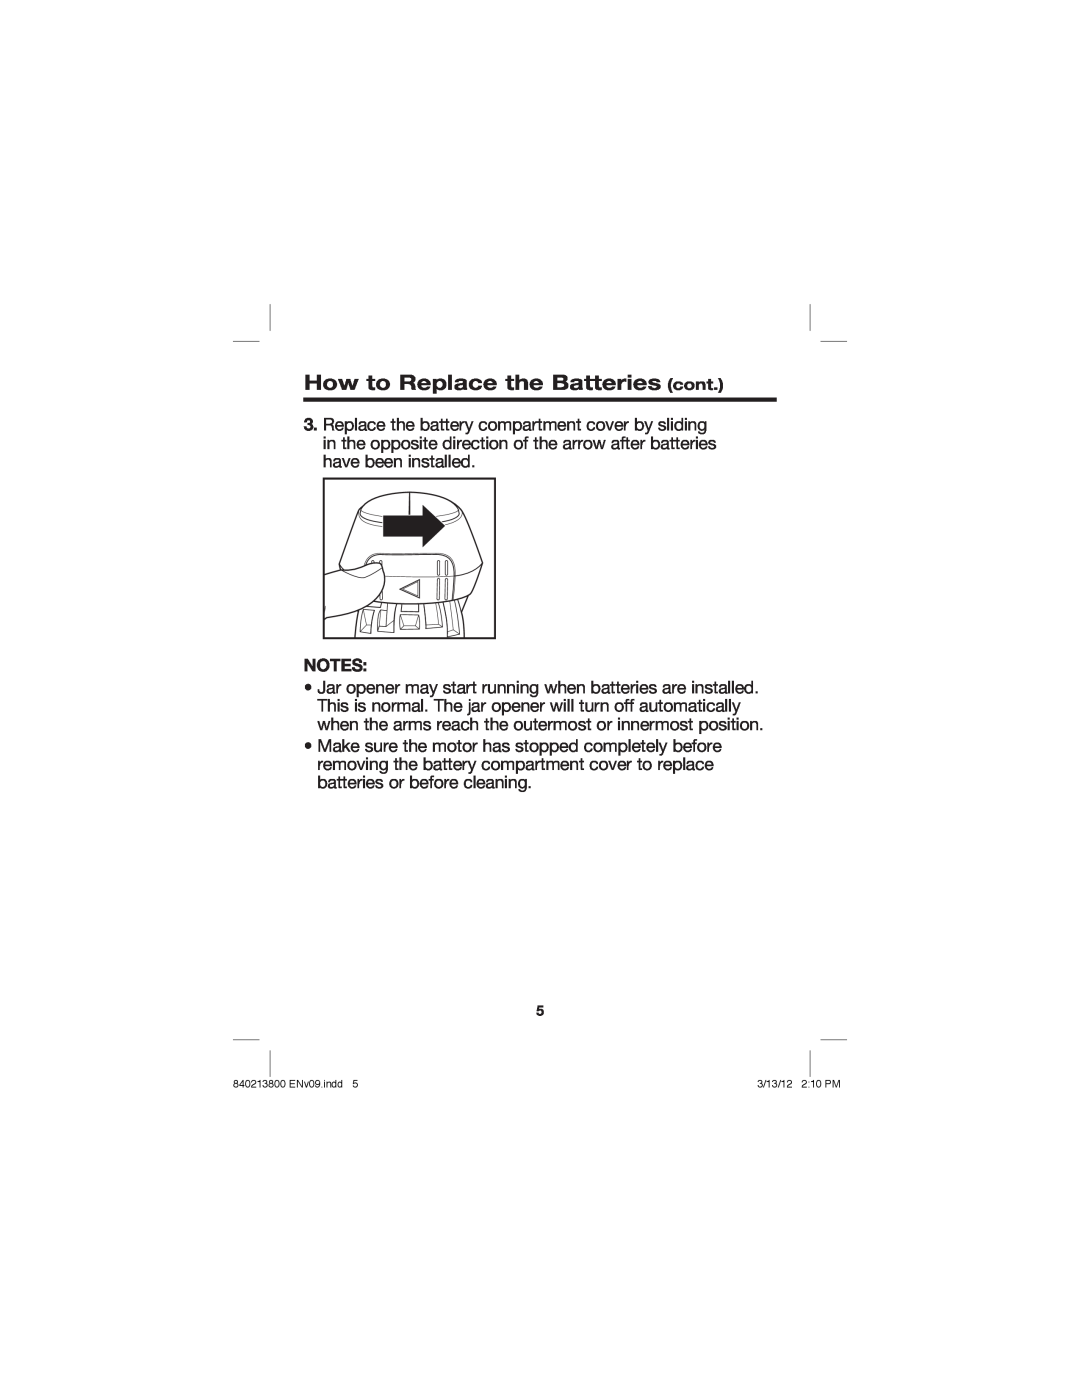 Hamilton Beach 840213800, Jar Opener manual How to Replace the Batteries cont 